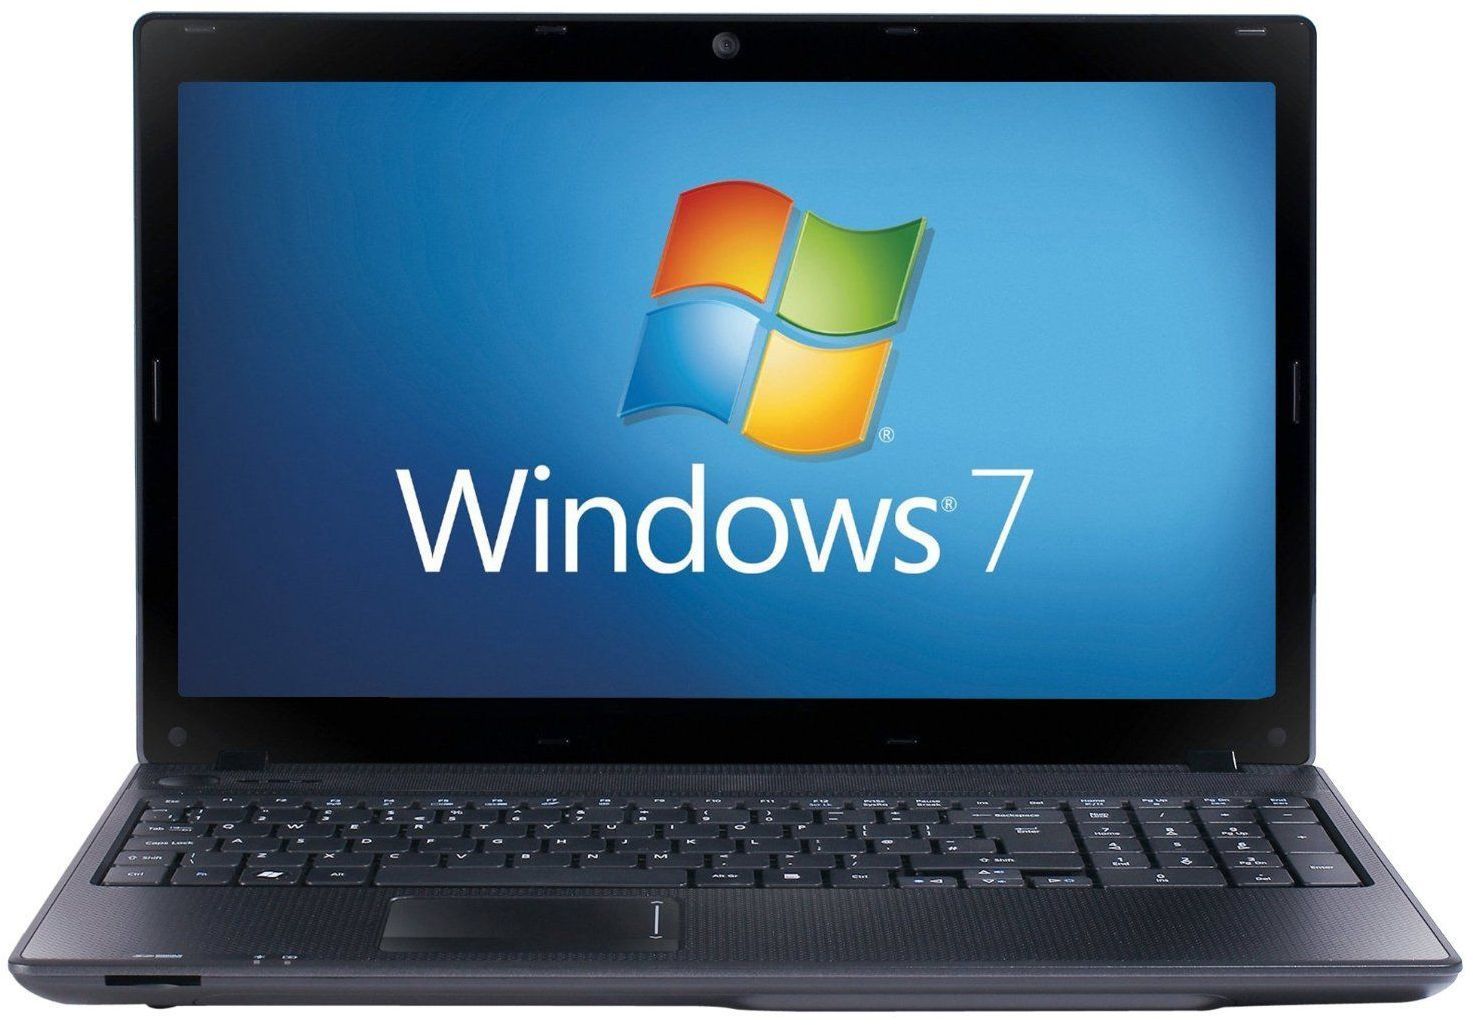 4 Important Lessons from the Windows 7 End of Life